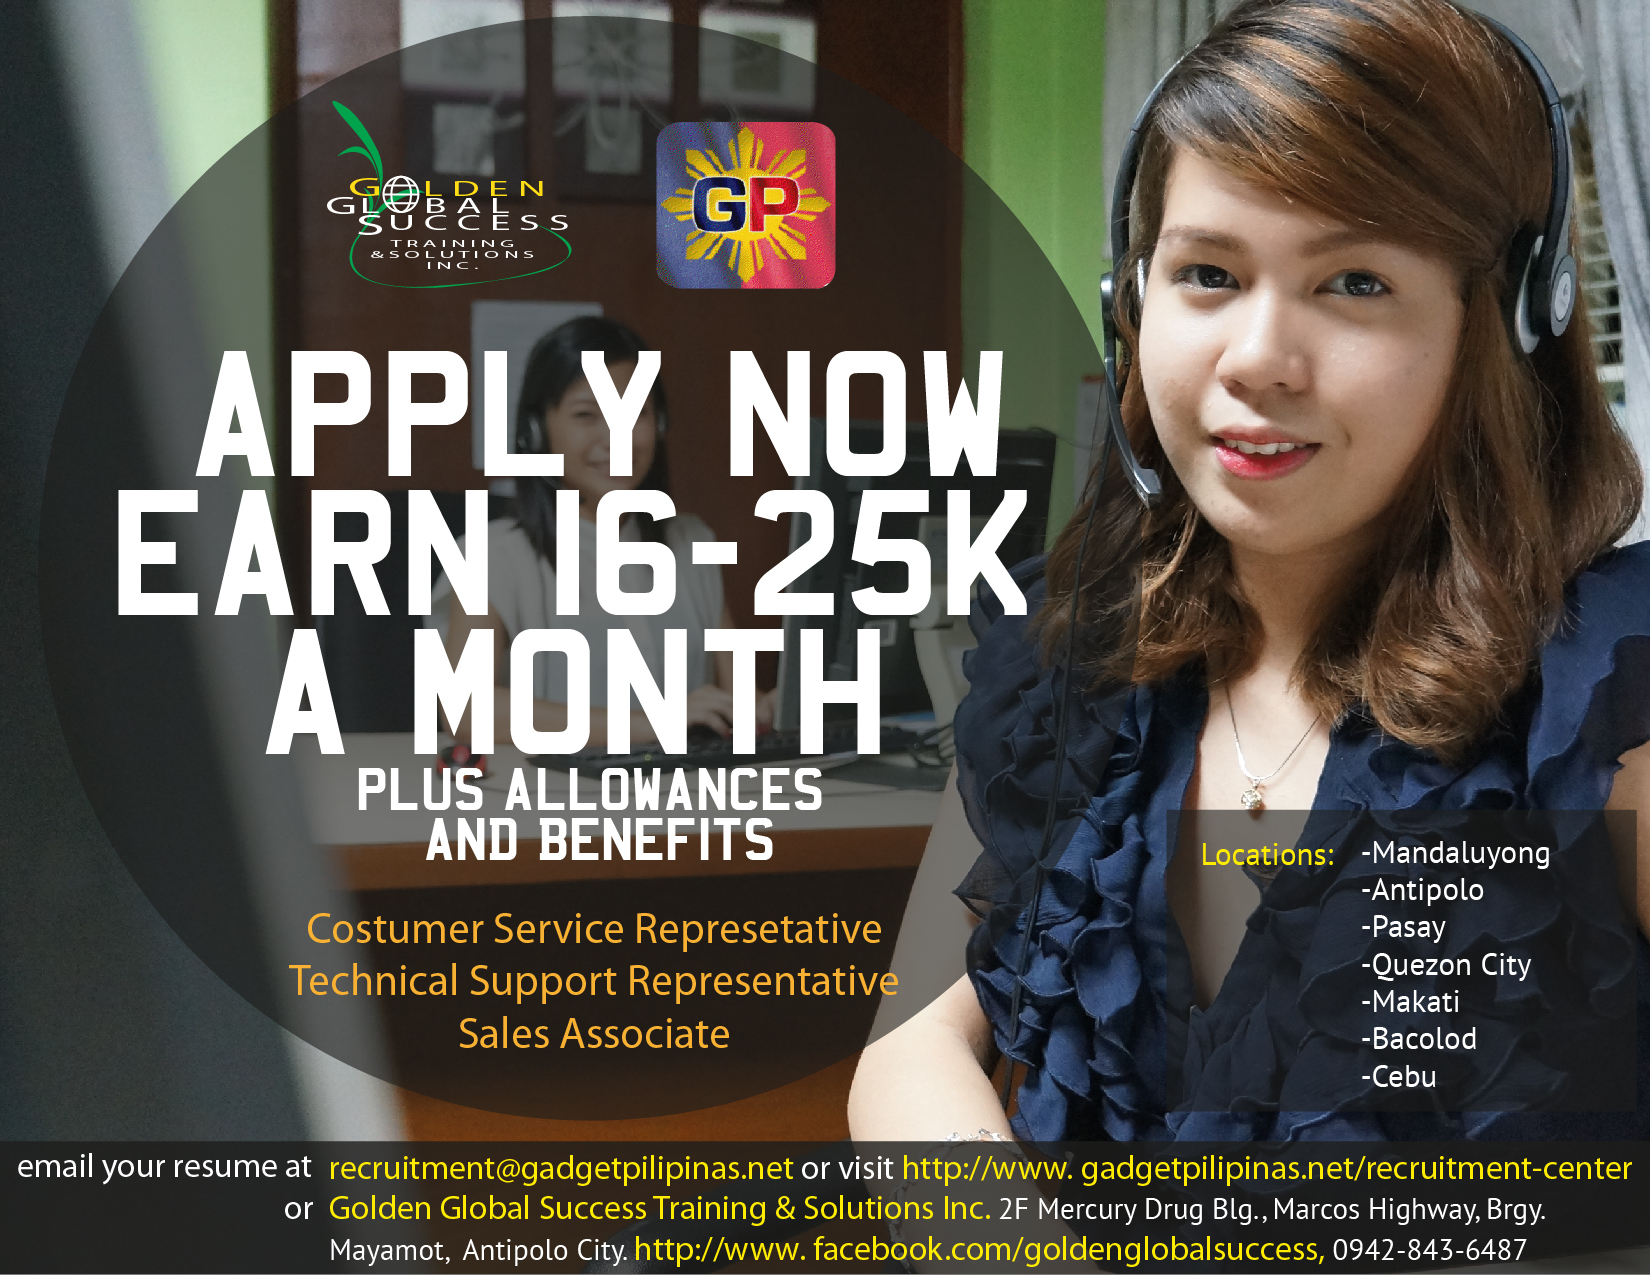 Be Part of a Growing Industry. Apply Now!